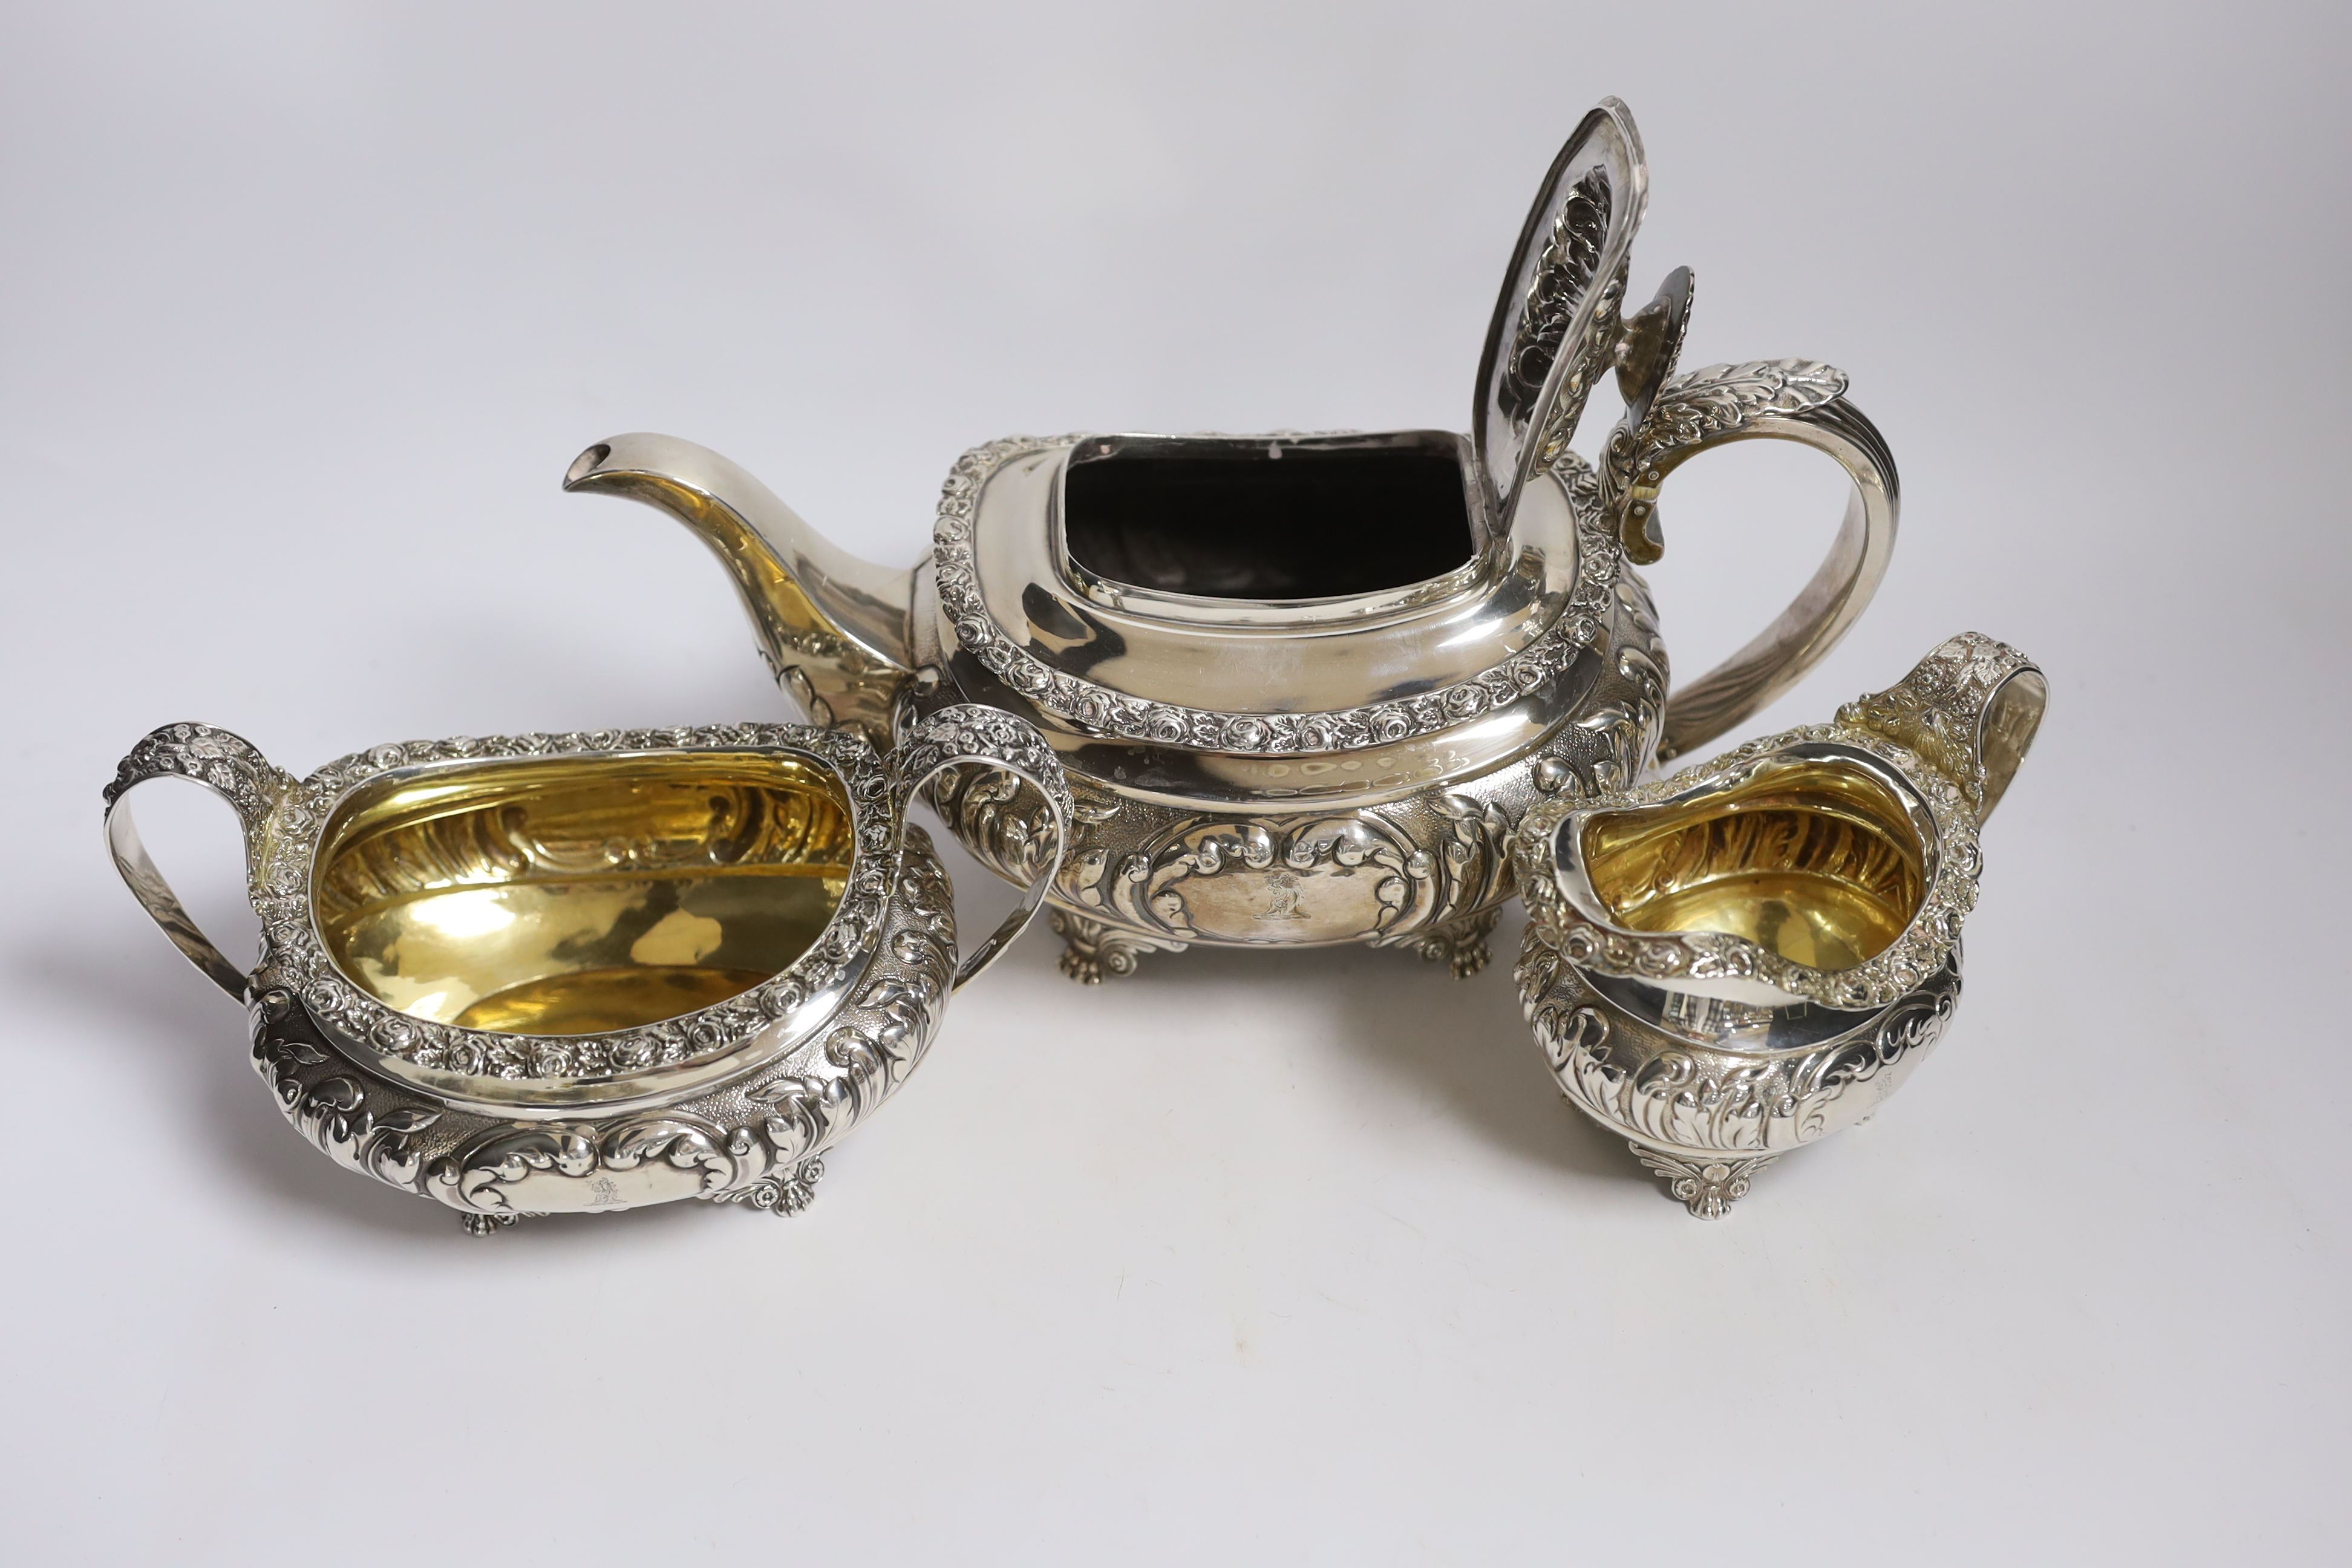 A George IV silver three piece oval tea set, on winged paw feet, by Naphtali Hart, London 1820, gross weight 39.4oz. CITES Submission reference WPRX4YEC